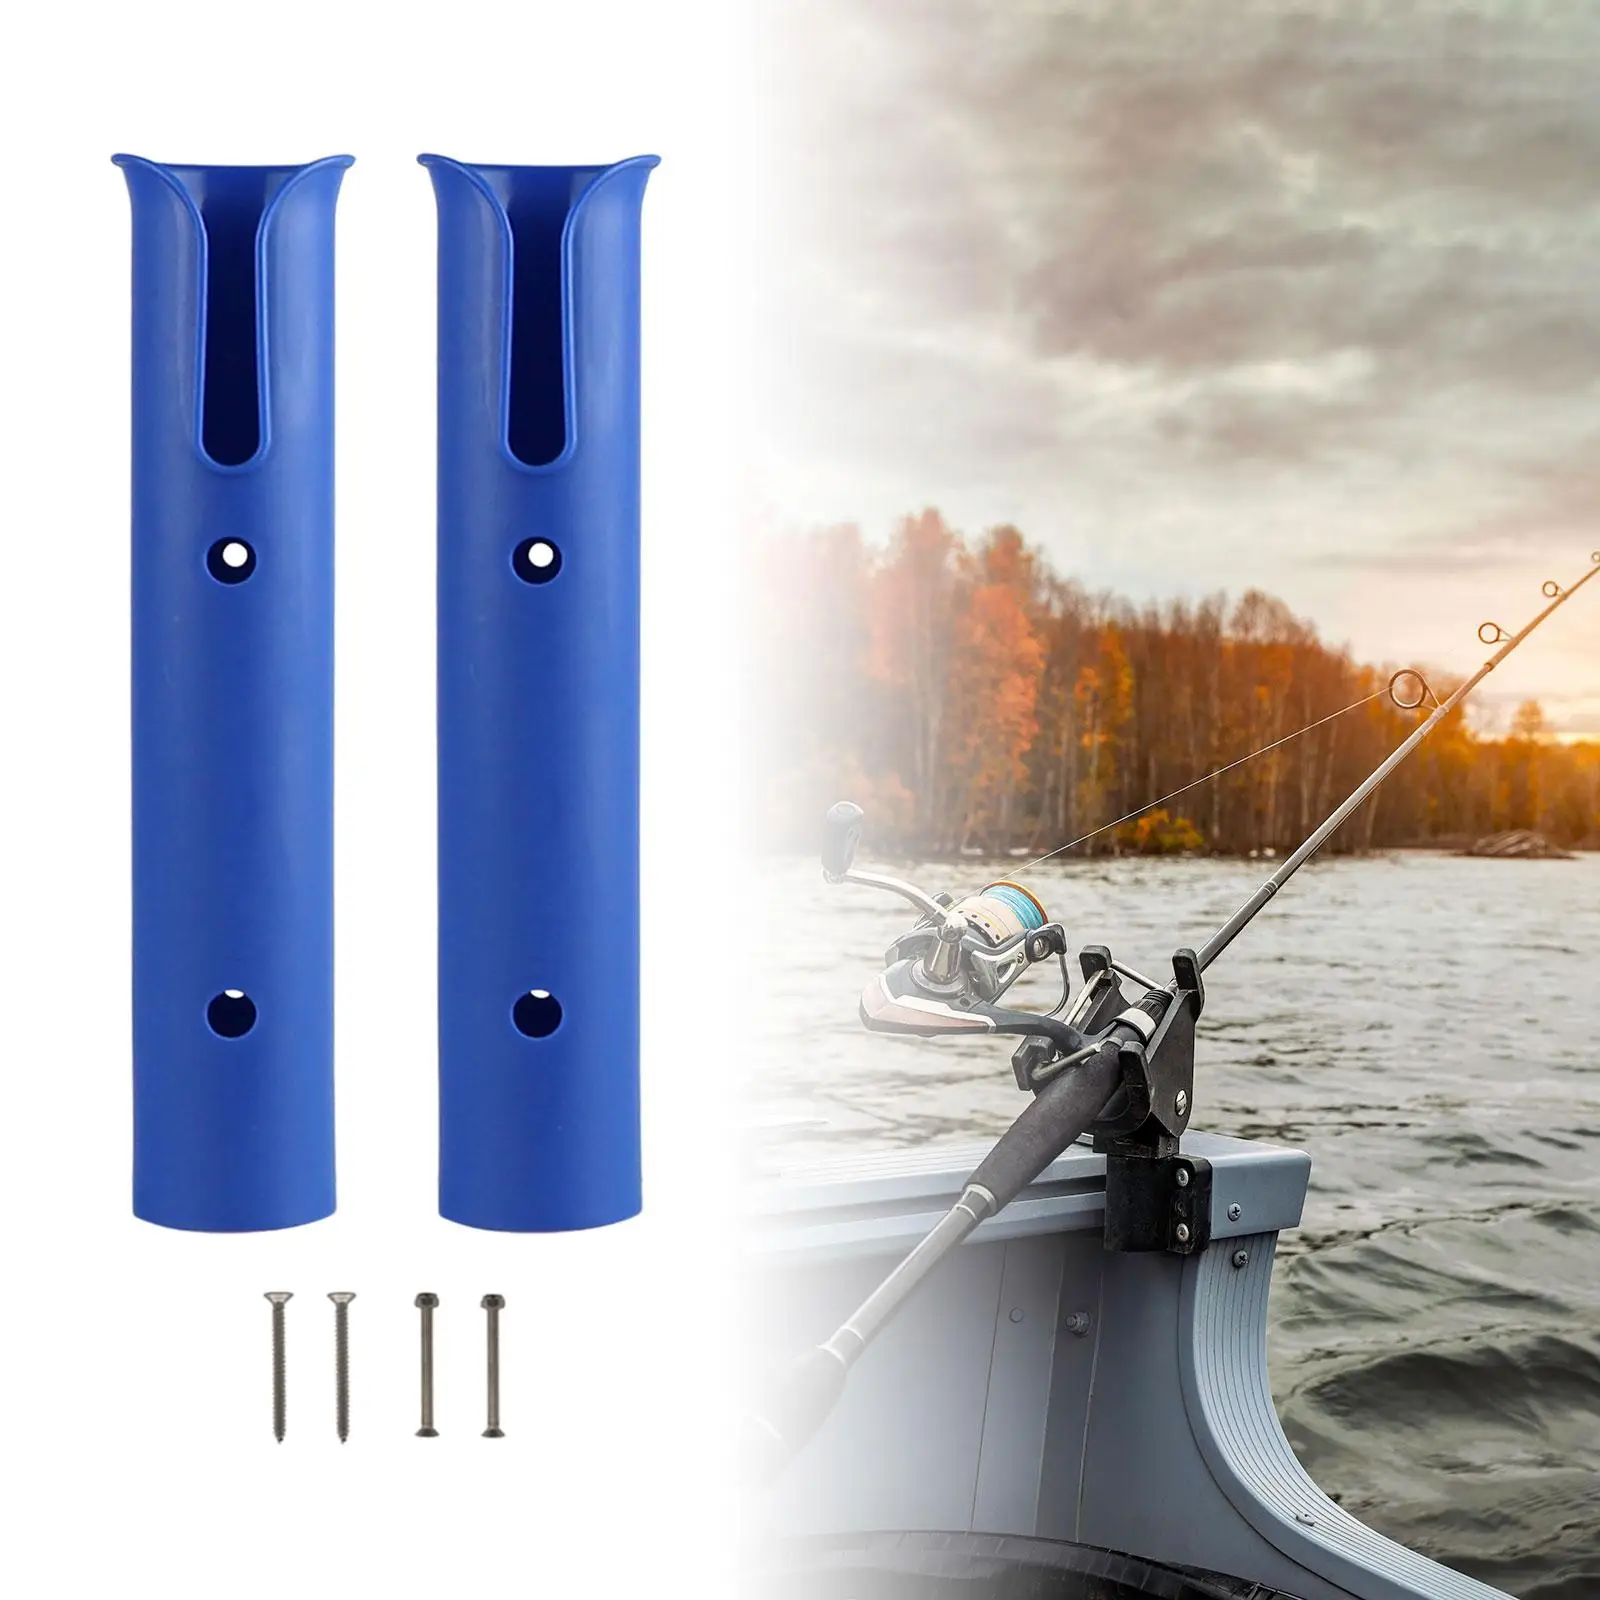 2 Pieces Fishing Rod Holder Tube Rod Portable Durable Hanger Organizer Fishing Rod Rack for Boat Trailer Kayak Cabin Accessories